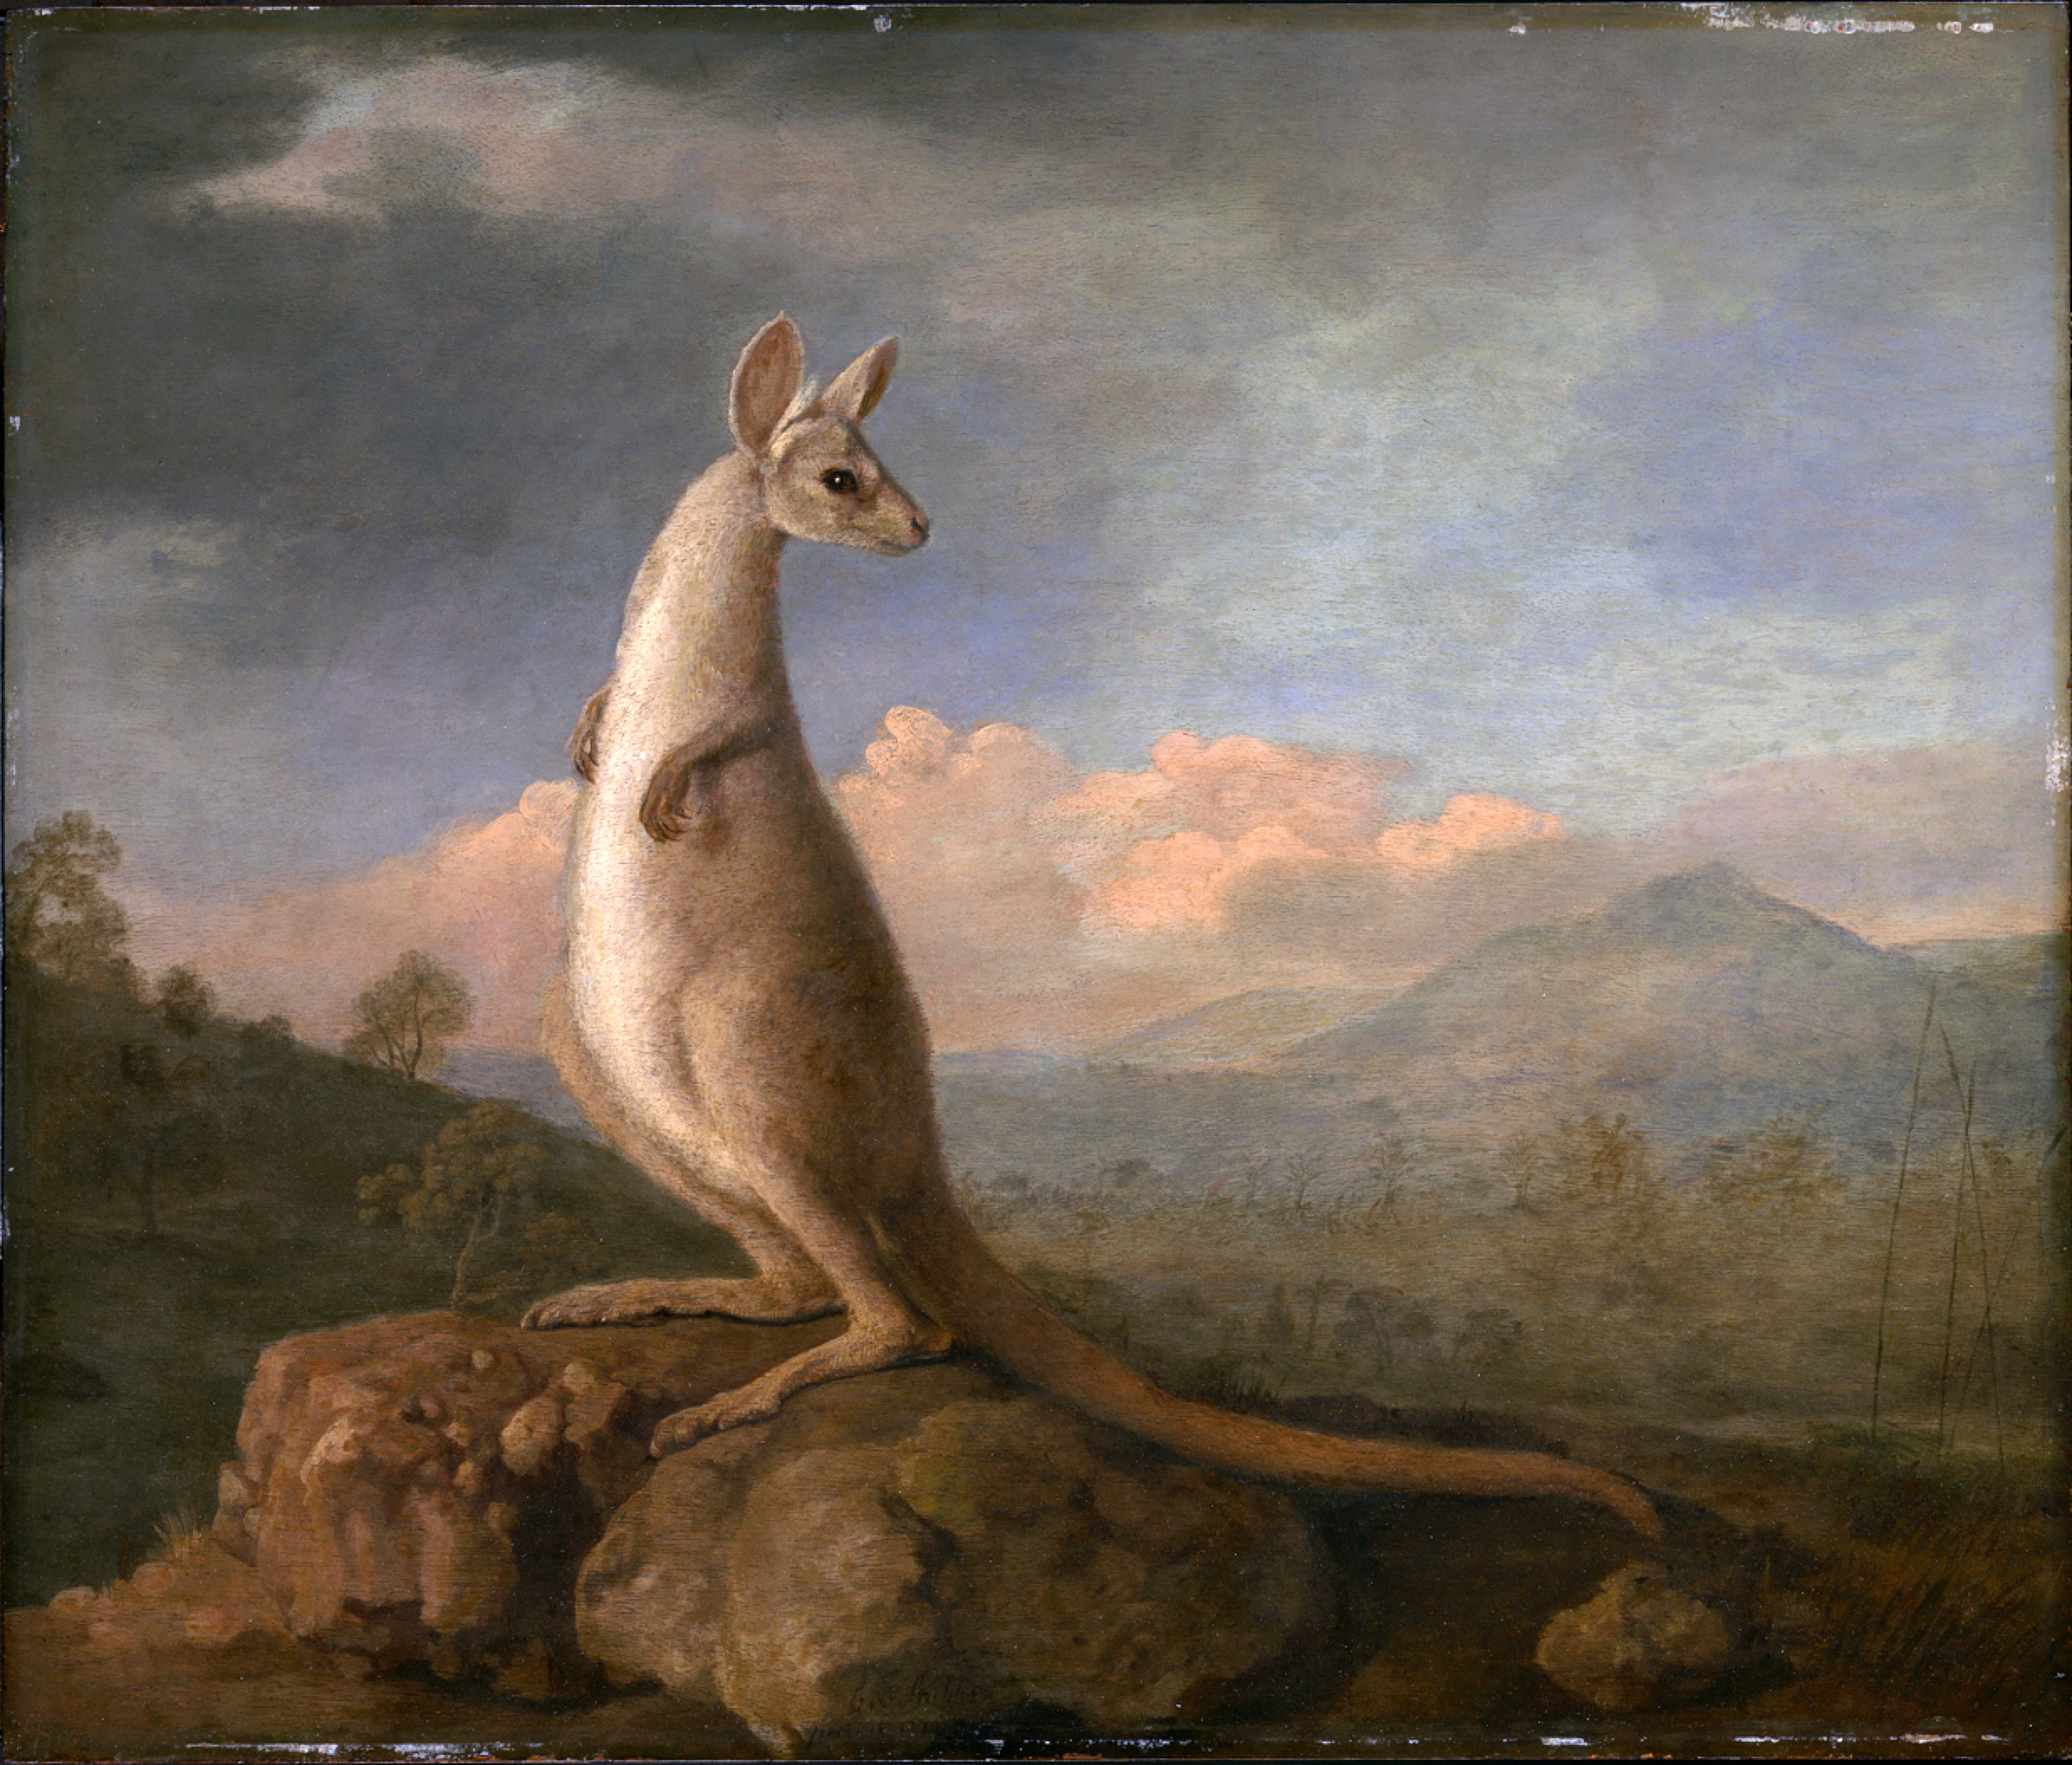 A profile portrait of a kangaroo who stands on a rock overlooking a cloudy sky.